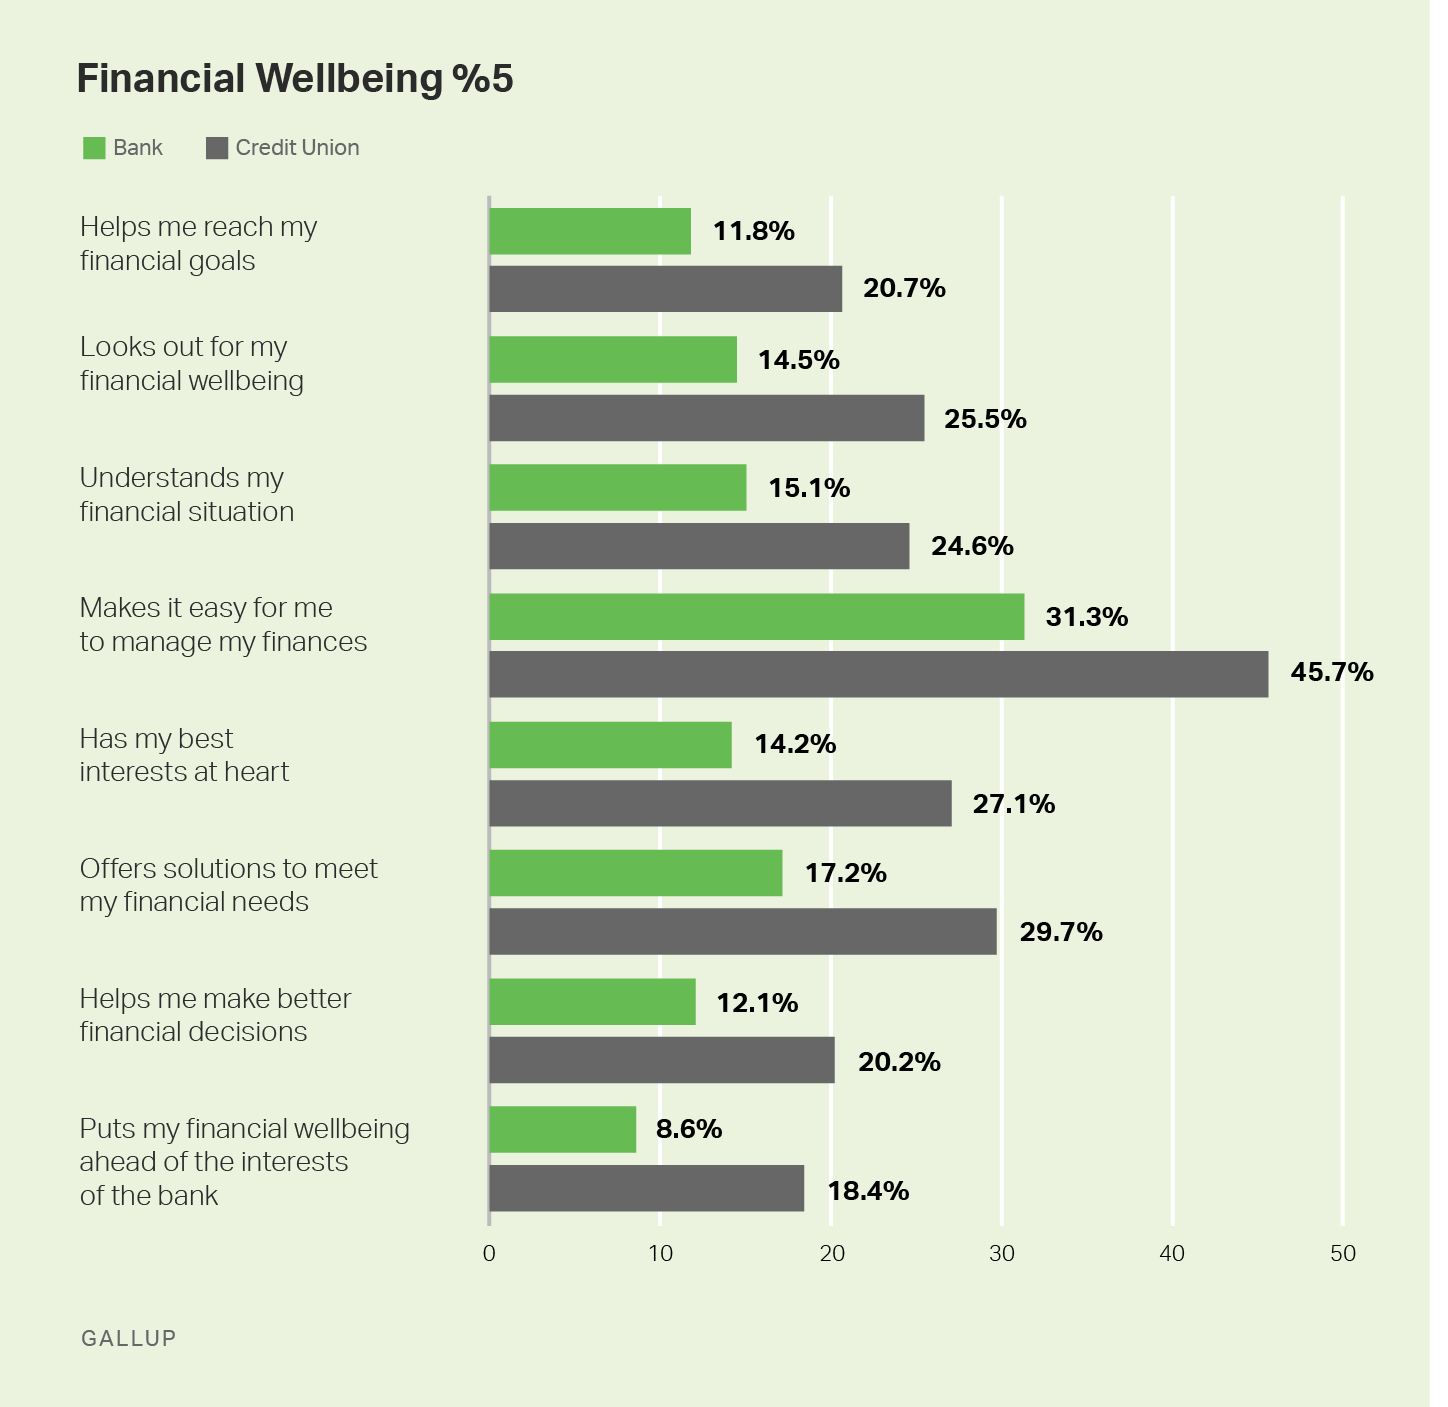 Graphic showing %5 responses to statements about financial wellbeing comparing credit union customers with bank customers.